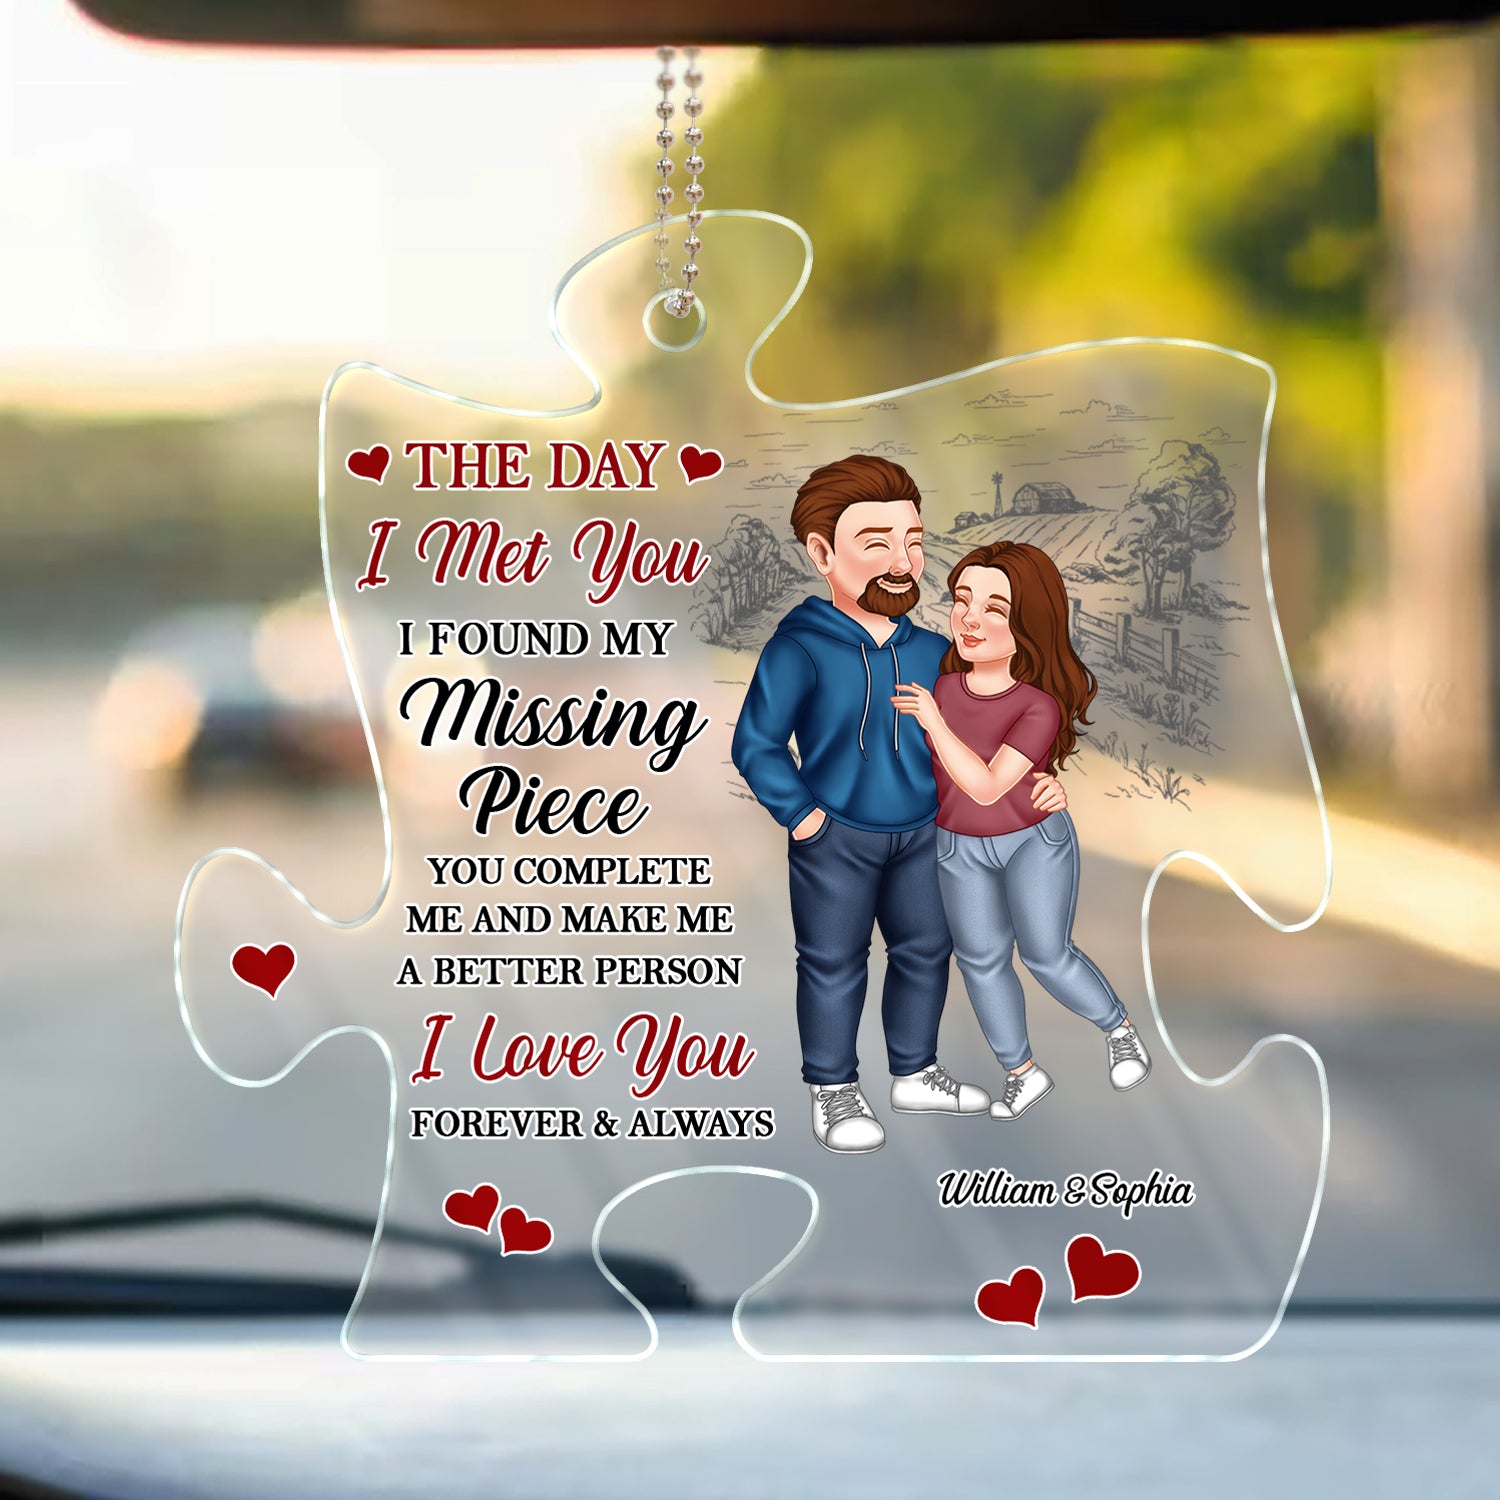 The Day I Met You I Found My Missing Piece - Anniversary Gift For Spouse, Lover, Husband, Wife, Boyfriend, Girlfriend, Couple - Personalized Acrylic Car Hanger